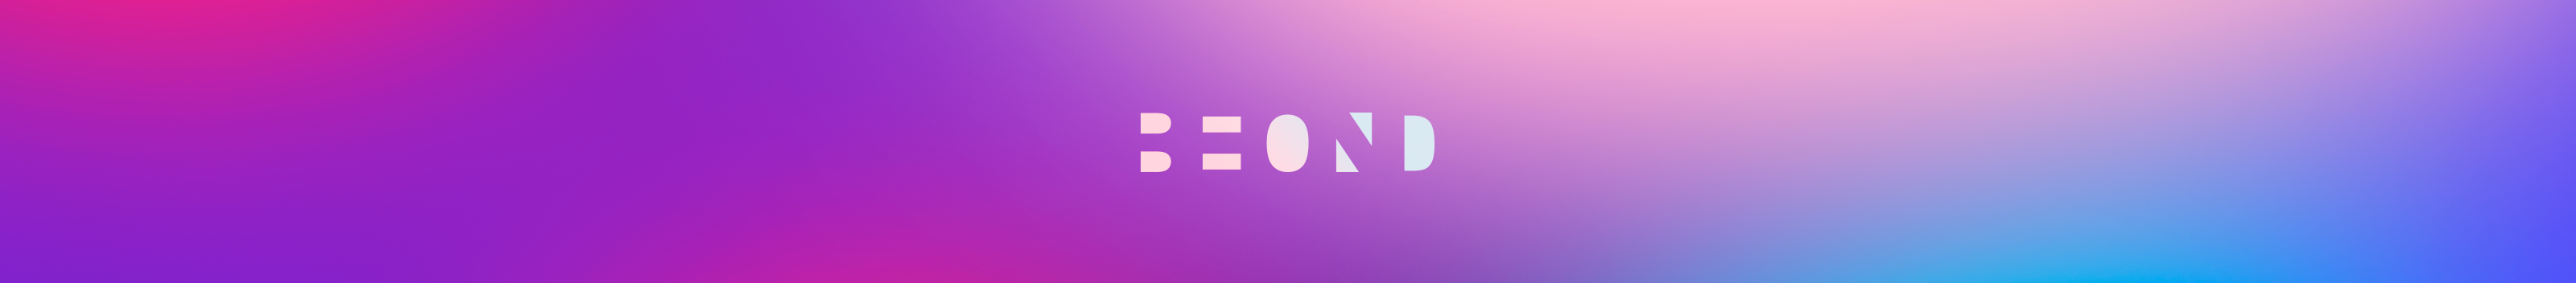 Beond Agency's profile banner